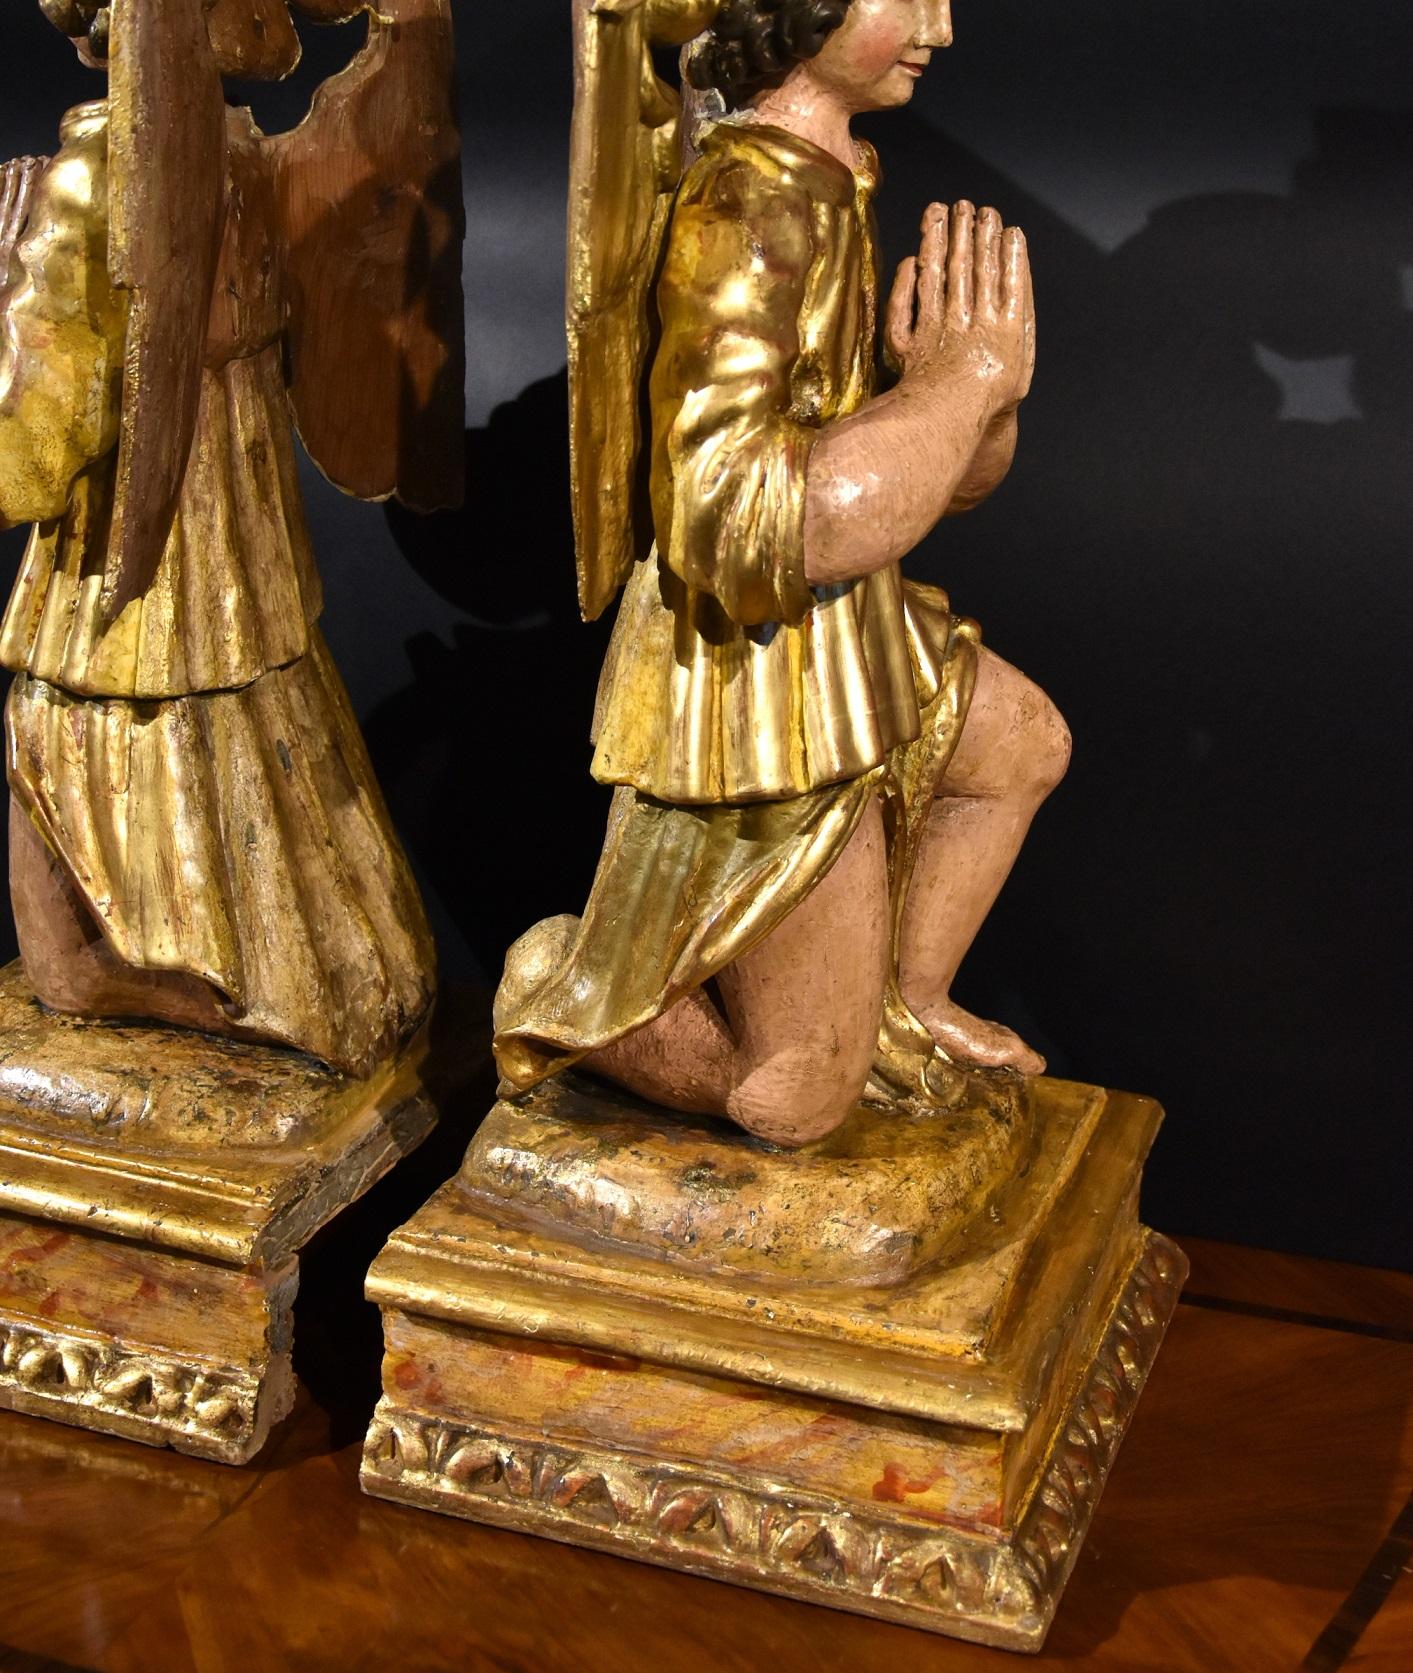 Pair Sculptures Winged Angels Wood Tuscany 17/18th Century Old master Gold Art  For Sale 9